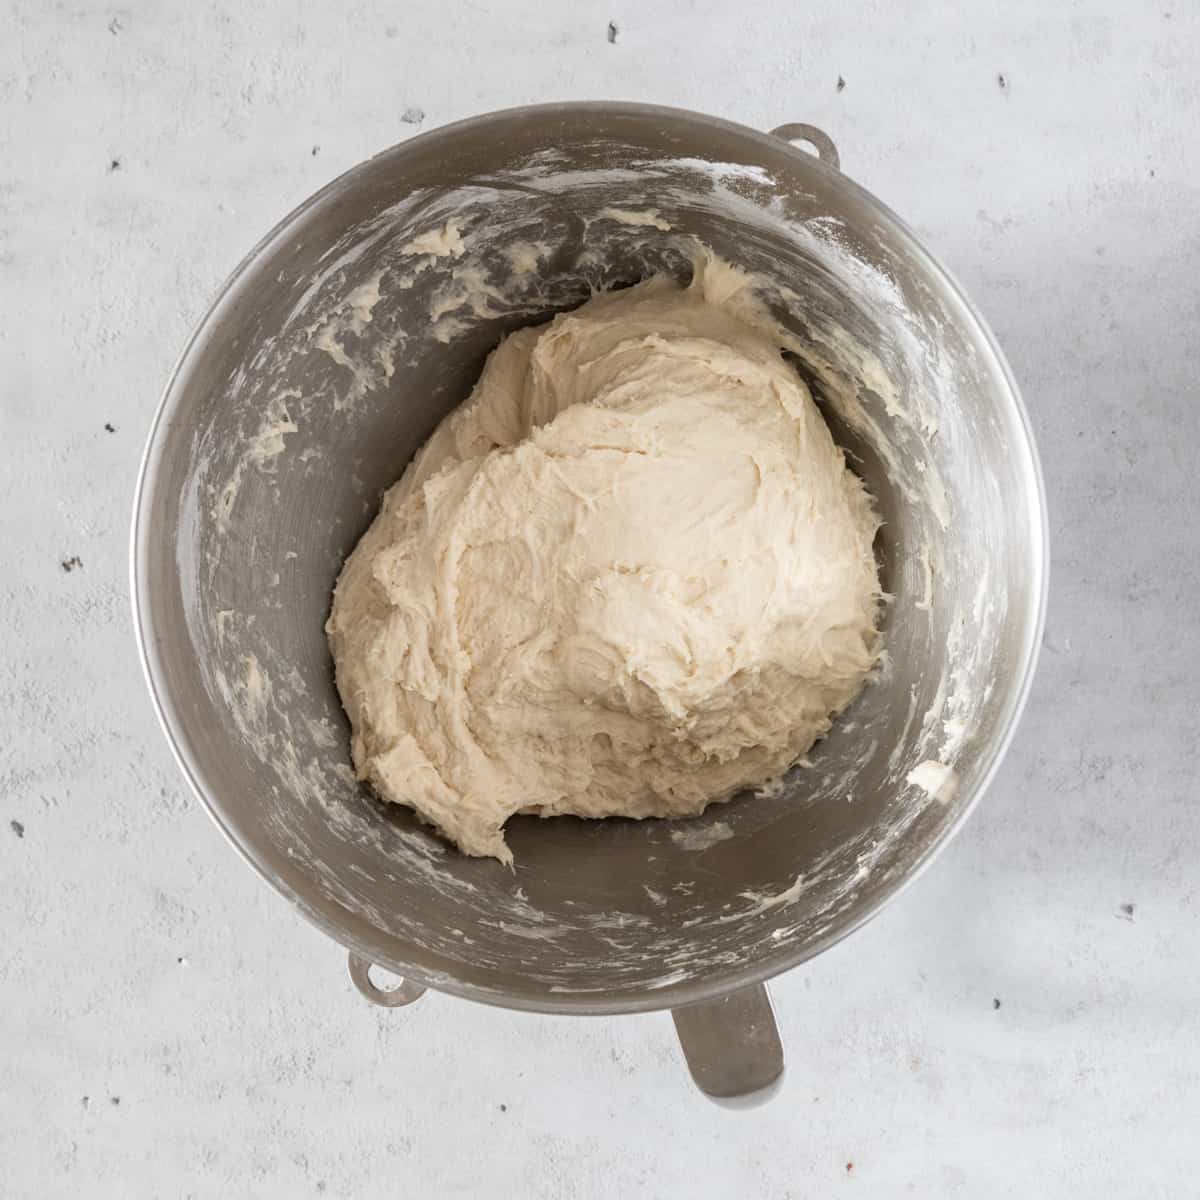 the completed dough in a metal mixing bowl on a grey background.